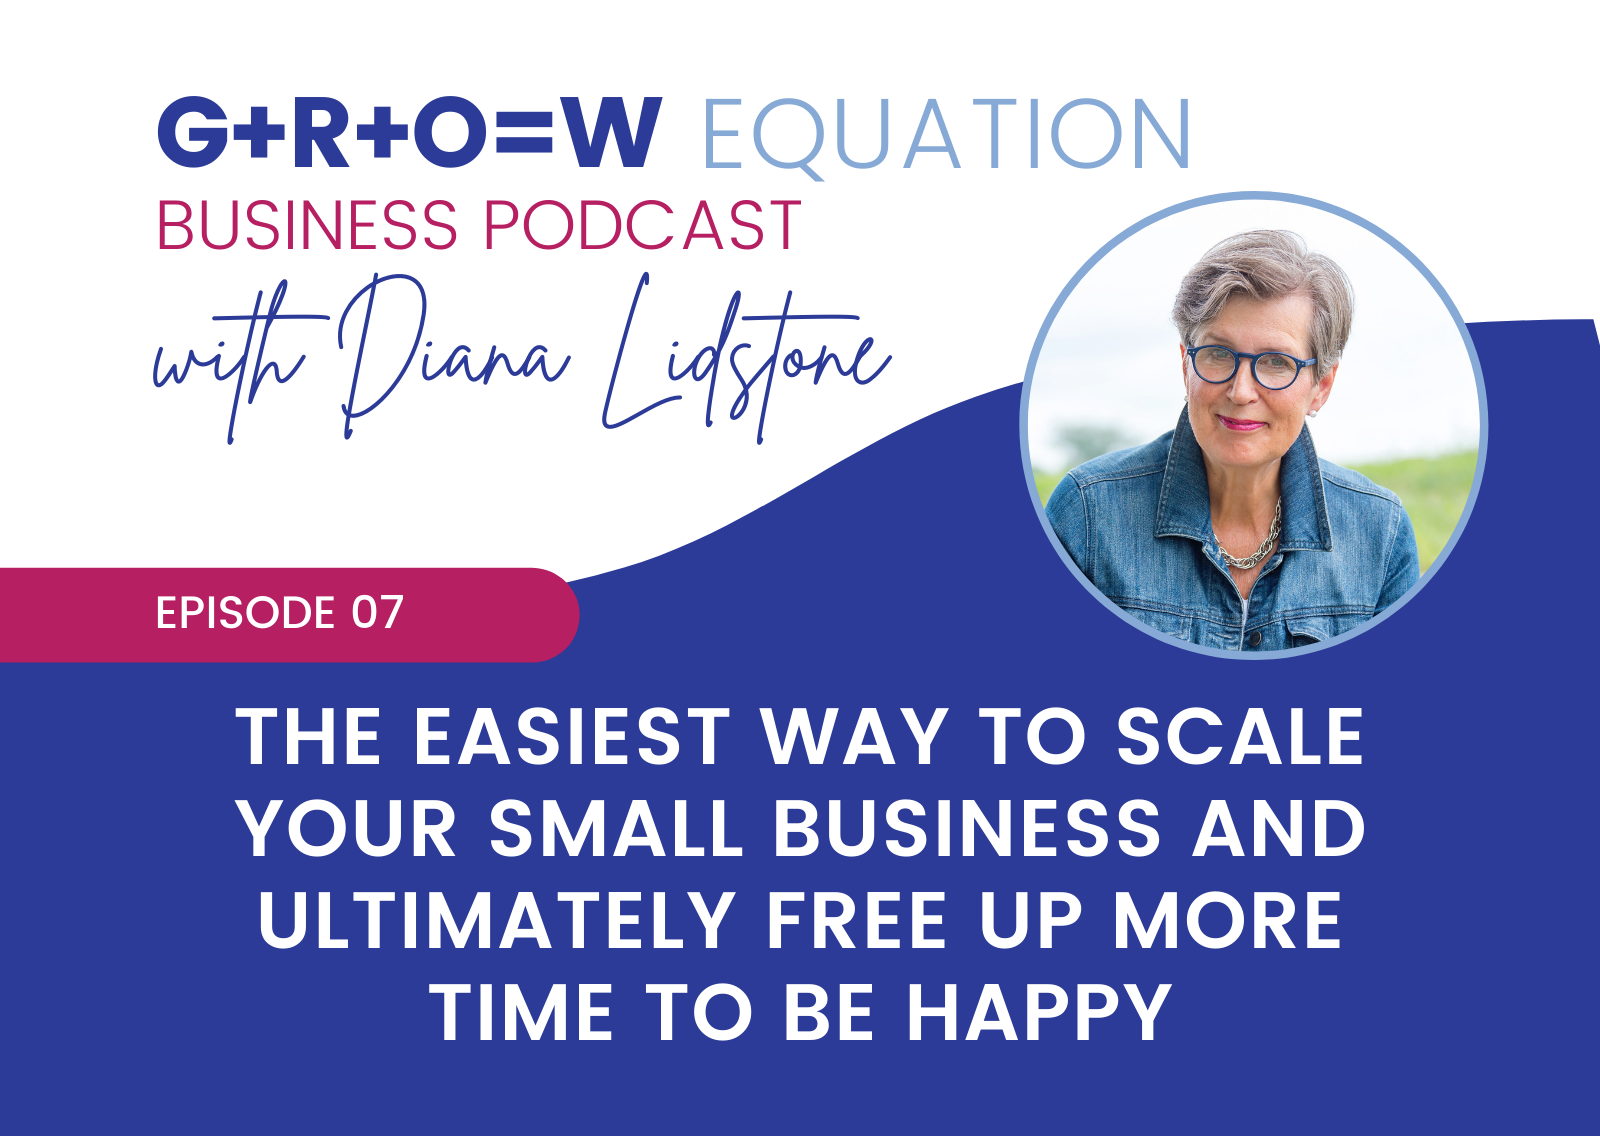 The Easiest Way to Scale Your Small Business and Ultimately Free Up More Time To Be Happy